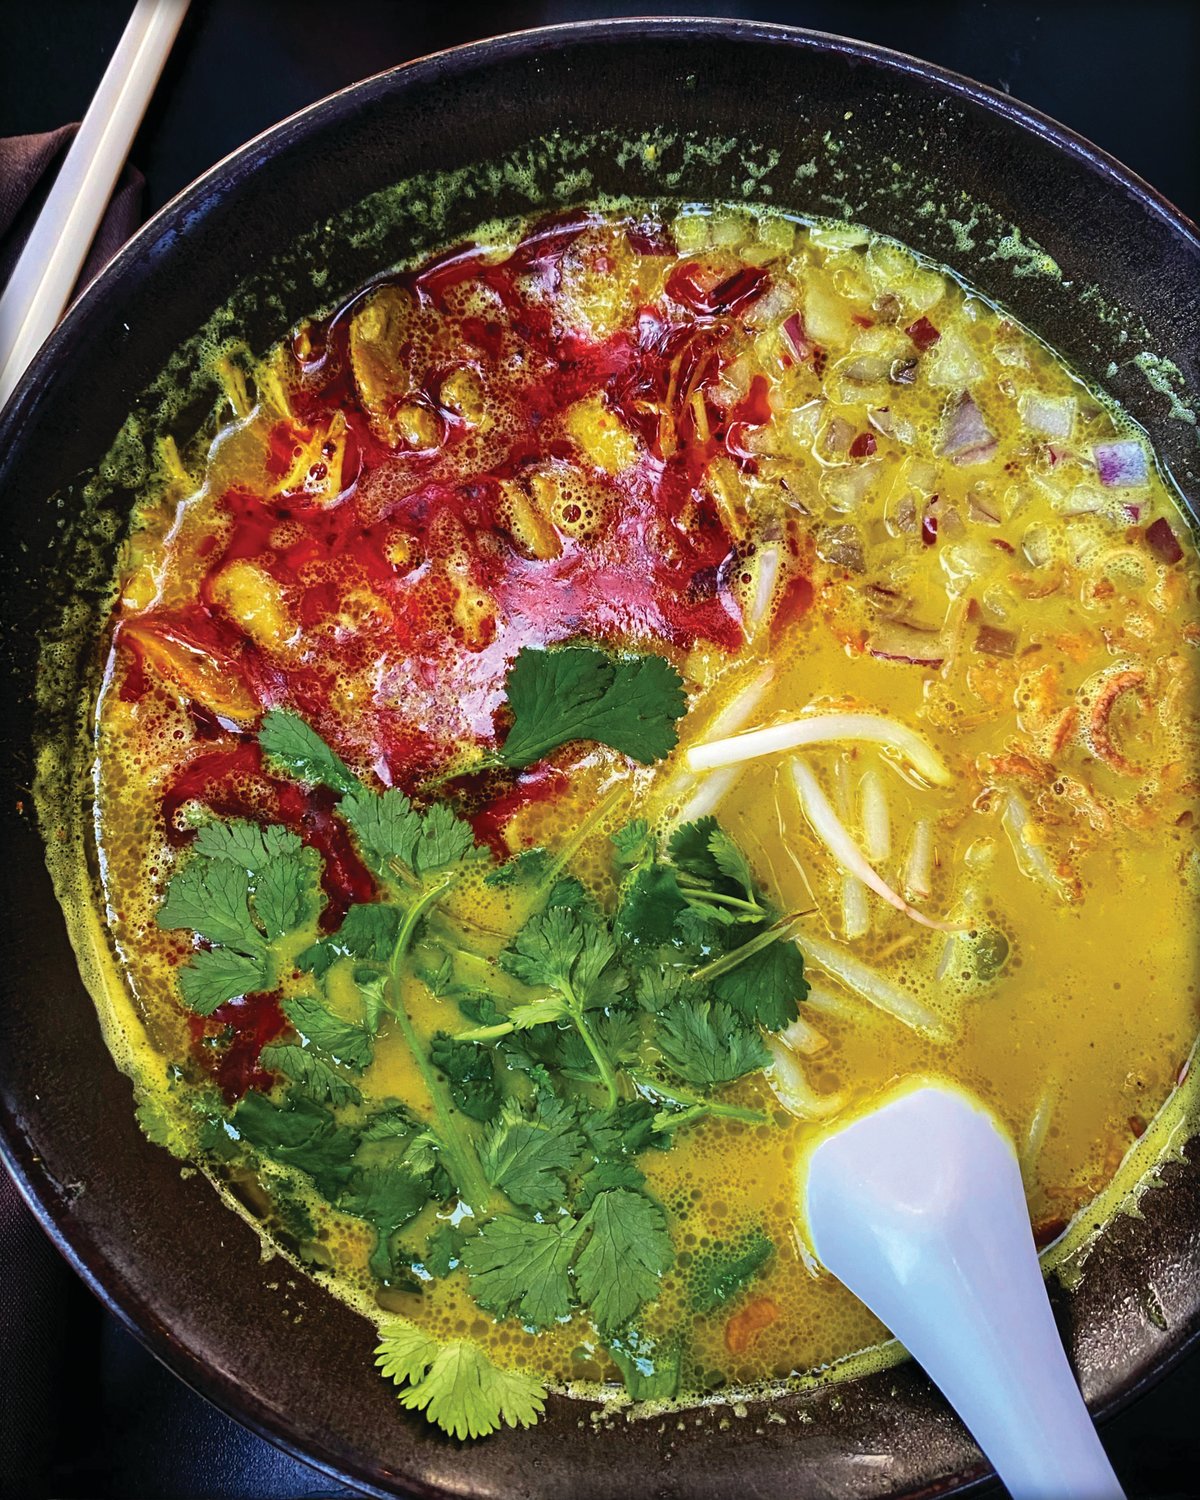 Khao Poon is a traditional Lao soup with red curry and rice noodles, fragrant with lemongrass and coconut.